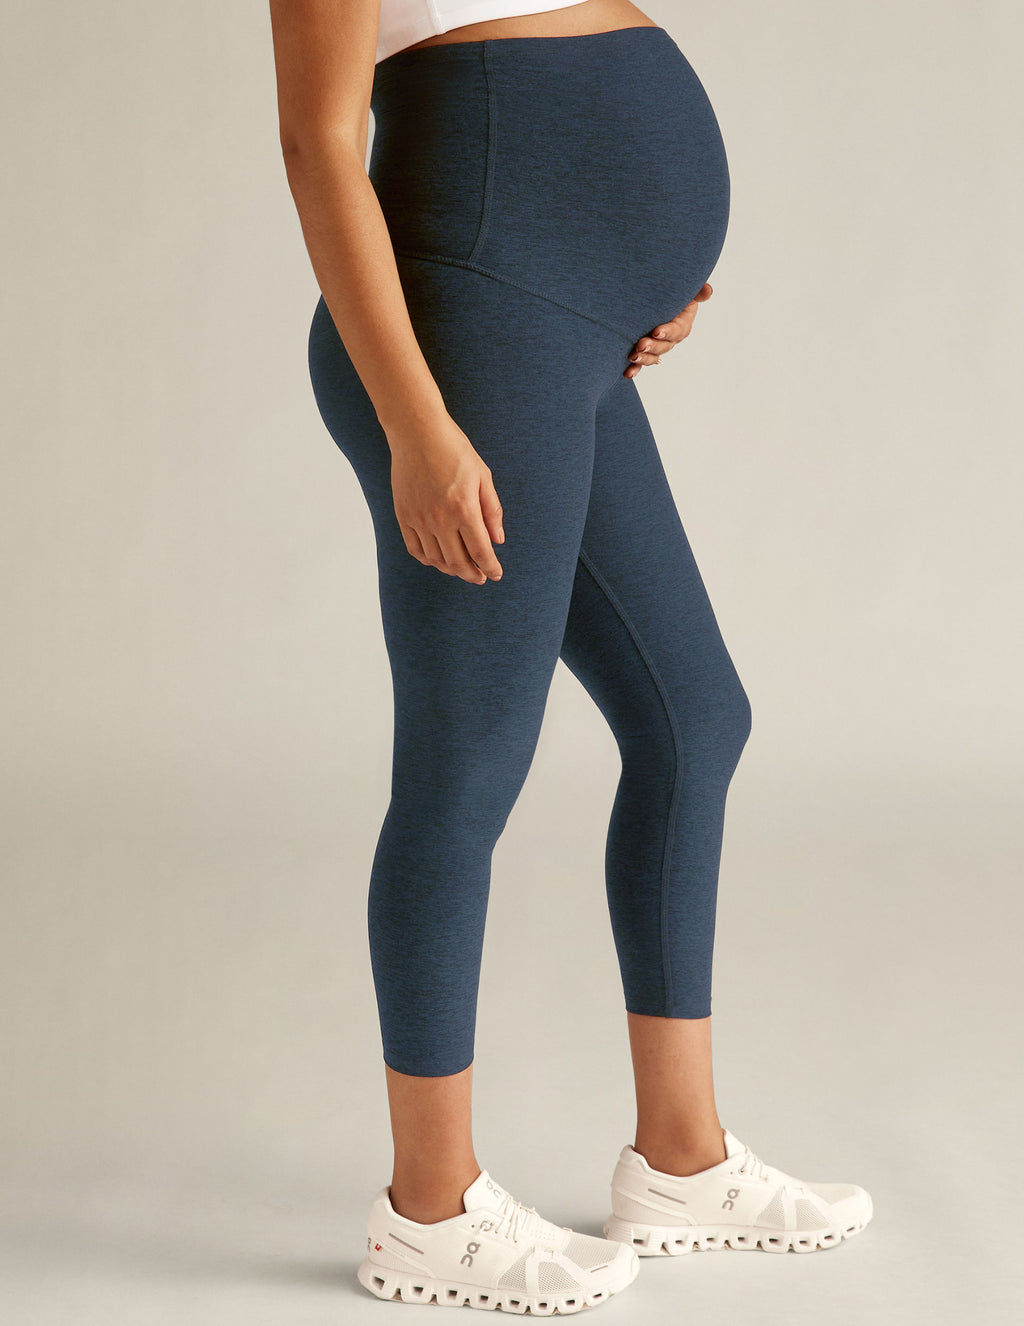 Maternity leggings – Womens Accessories And Clothing Outlet Store